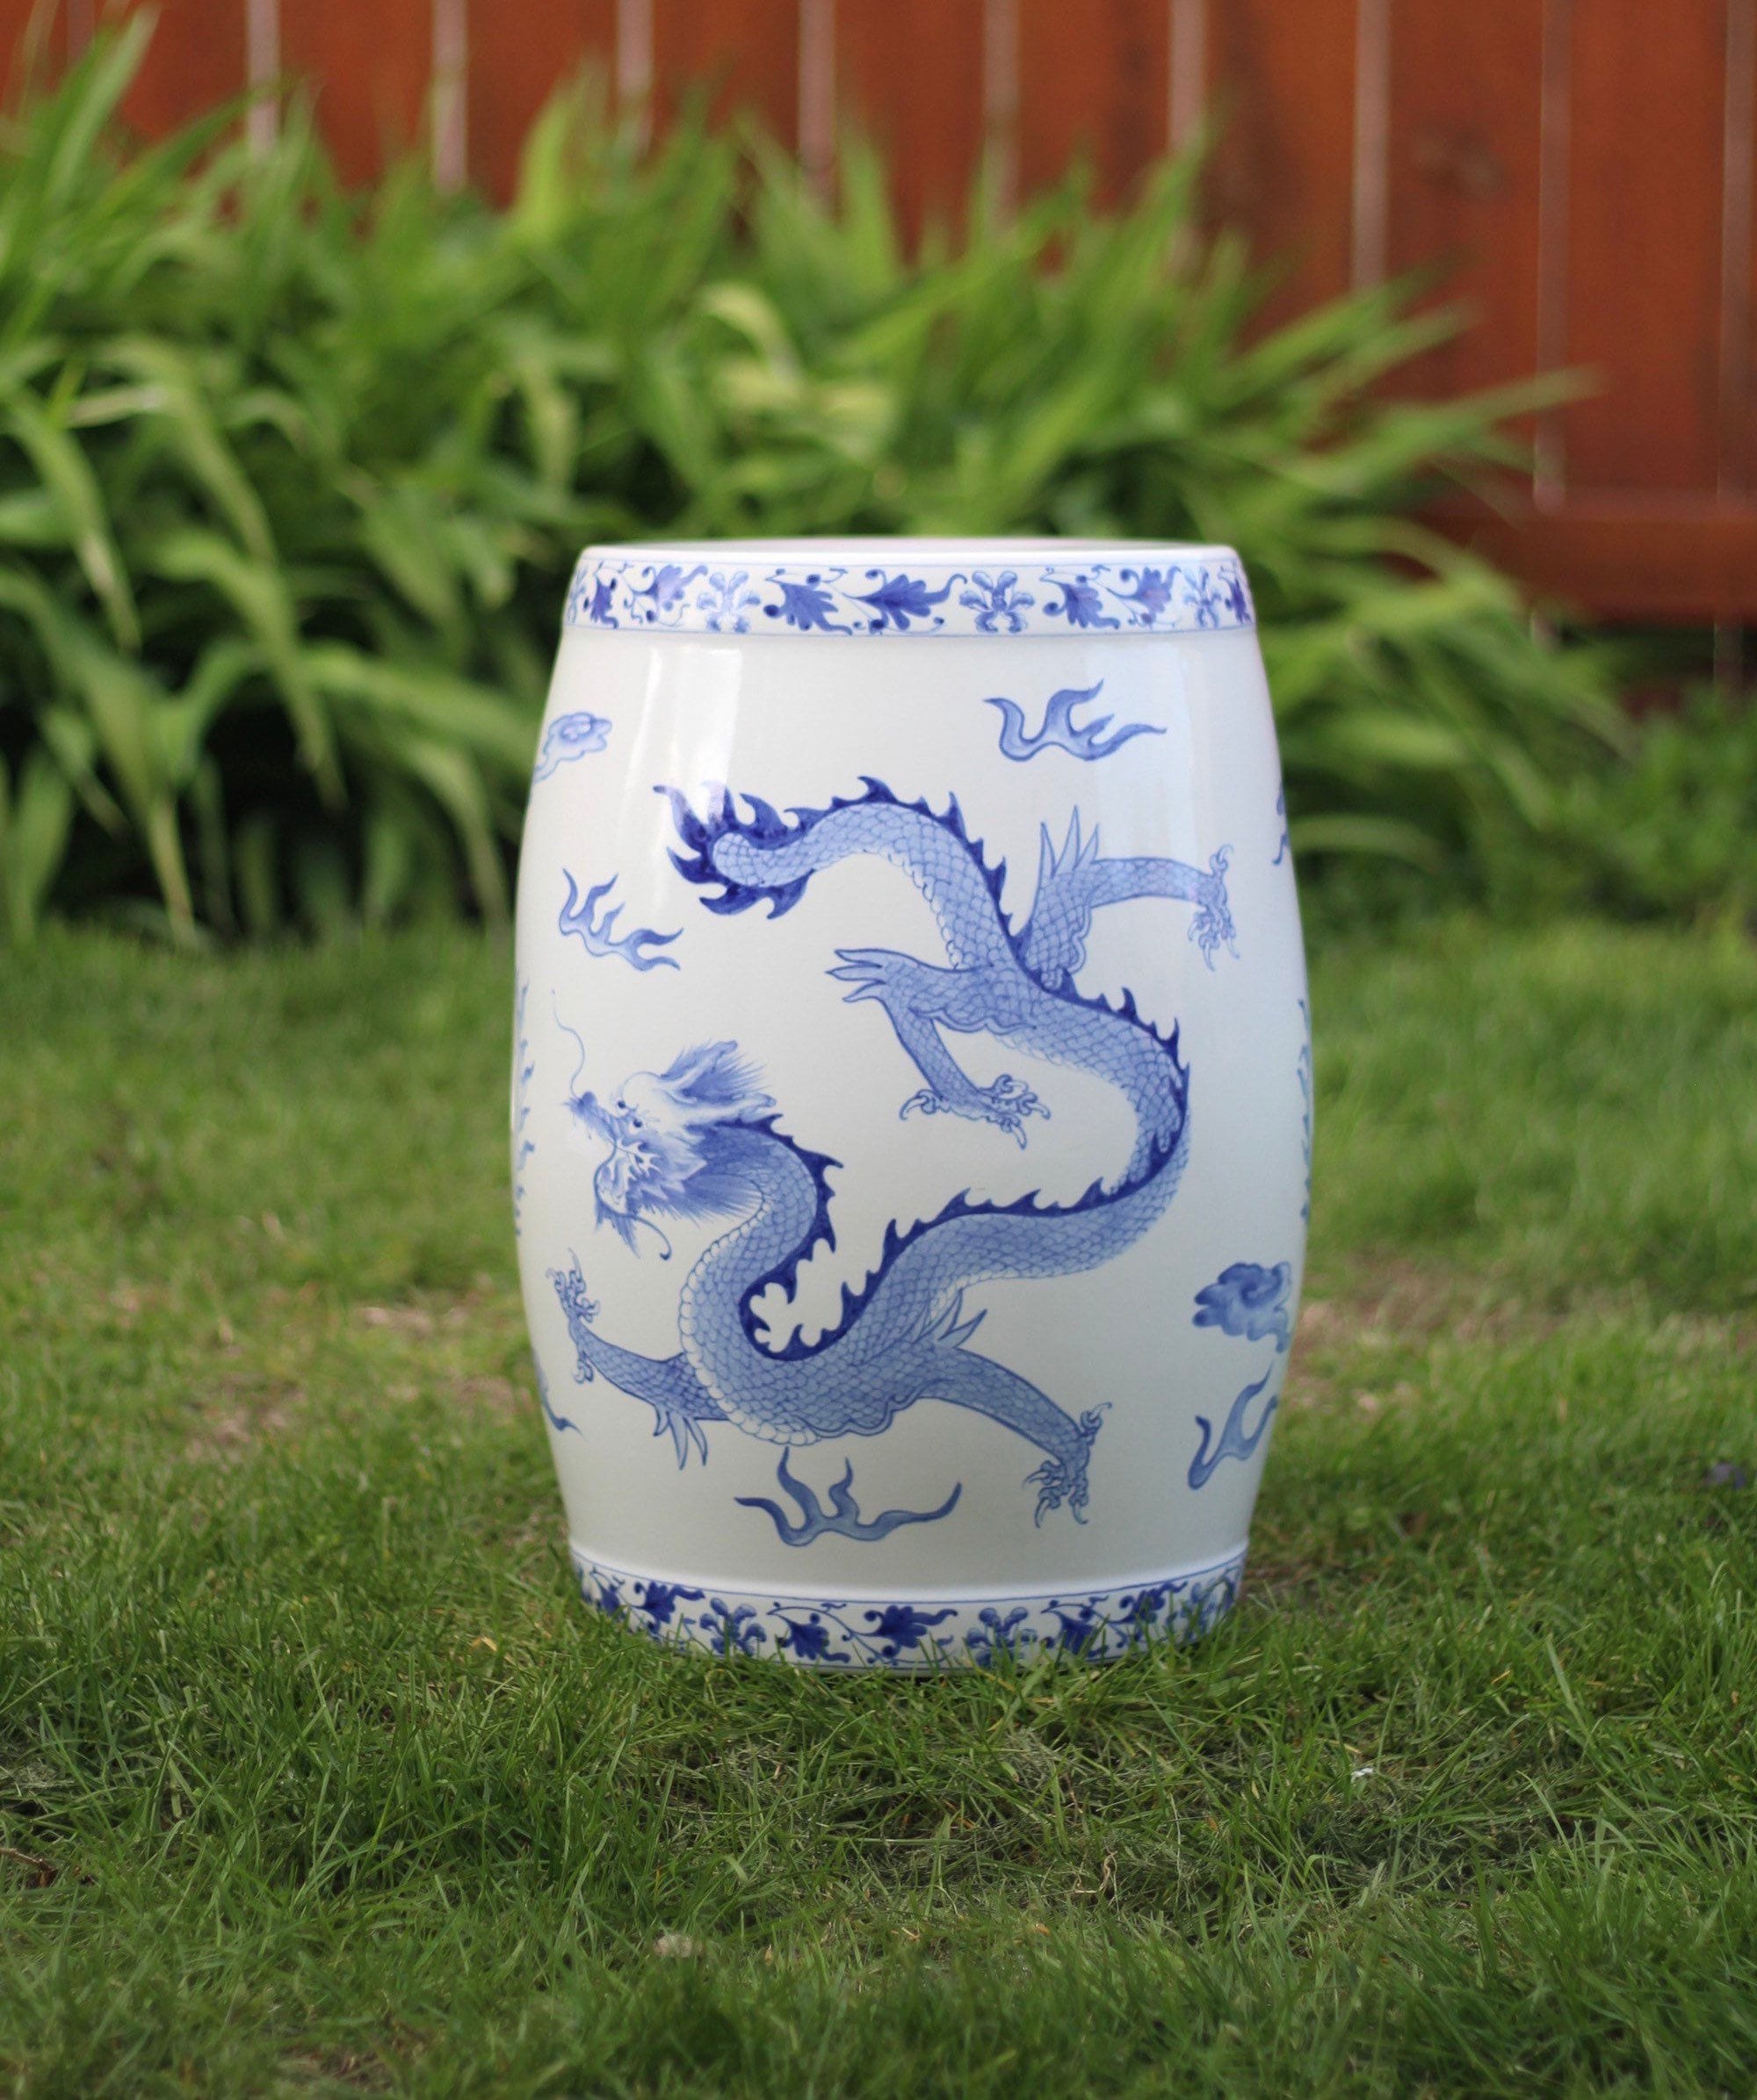 Accent Plus Glazed Outdoor Ceramic Garden Stool Butterfly Round Chinese Ceramic Stool 